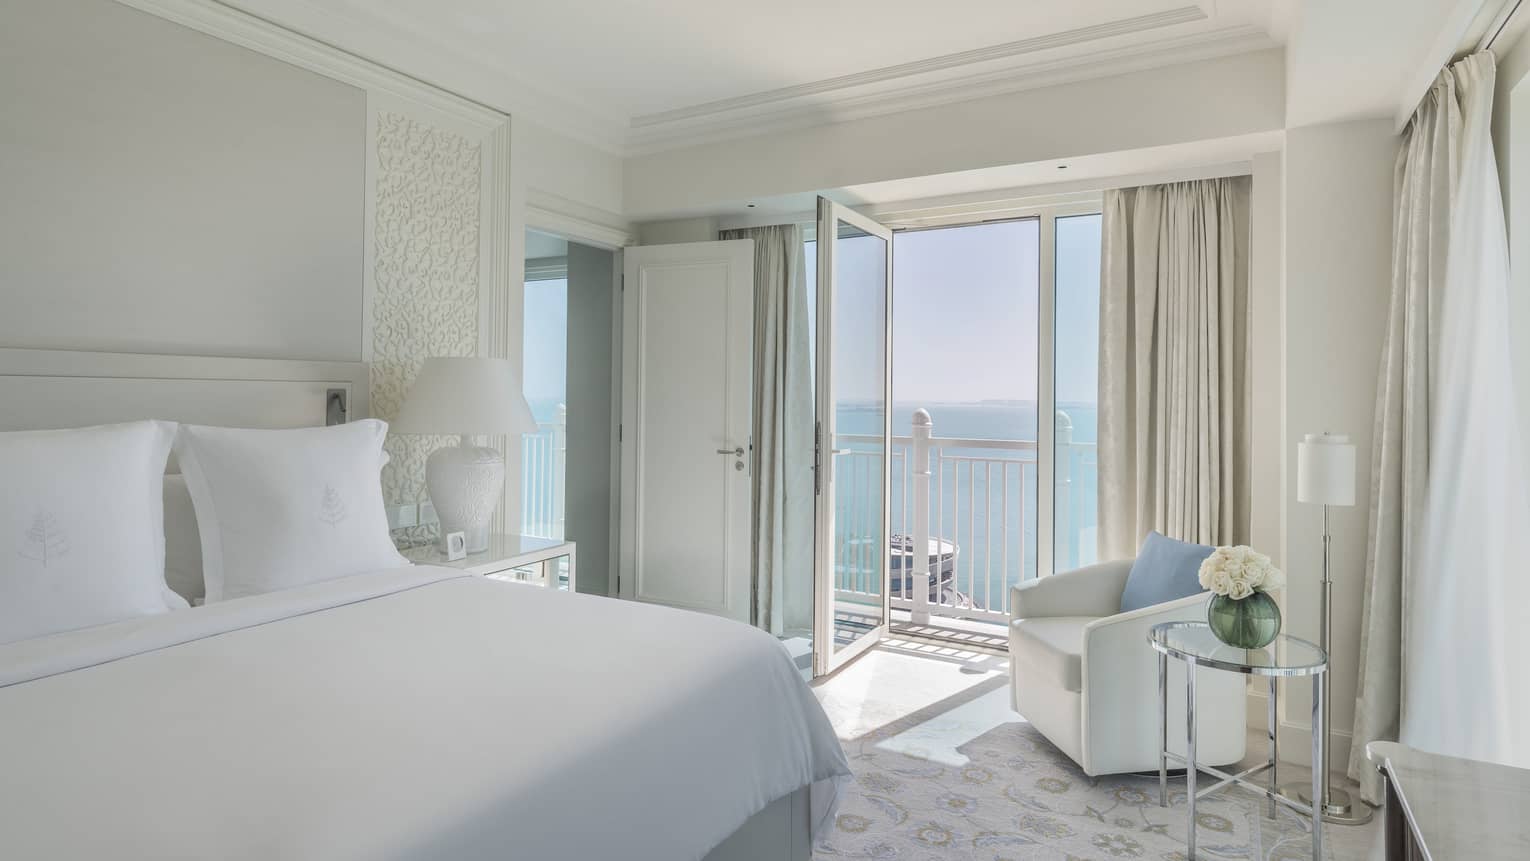 A suite with a large white bed, and an open balcony overlooking the sea.